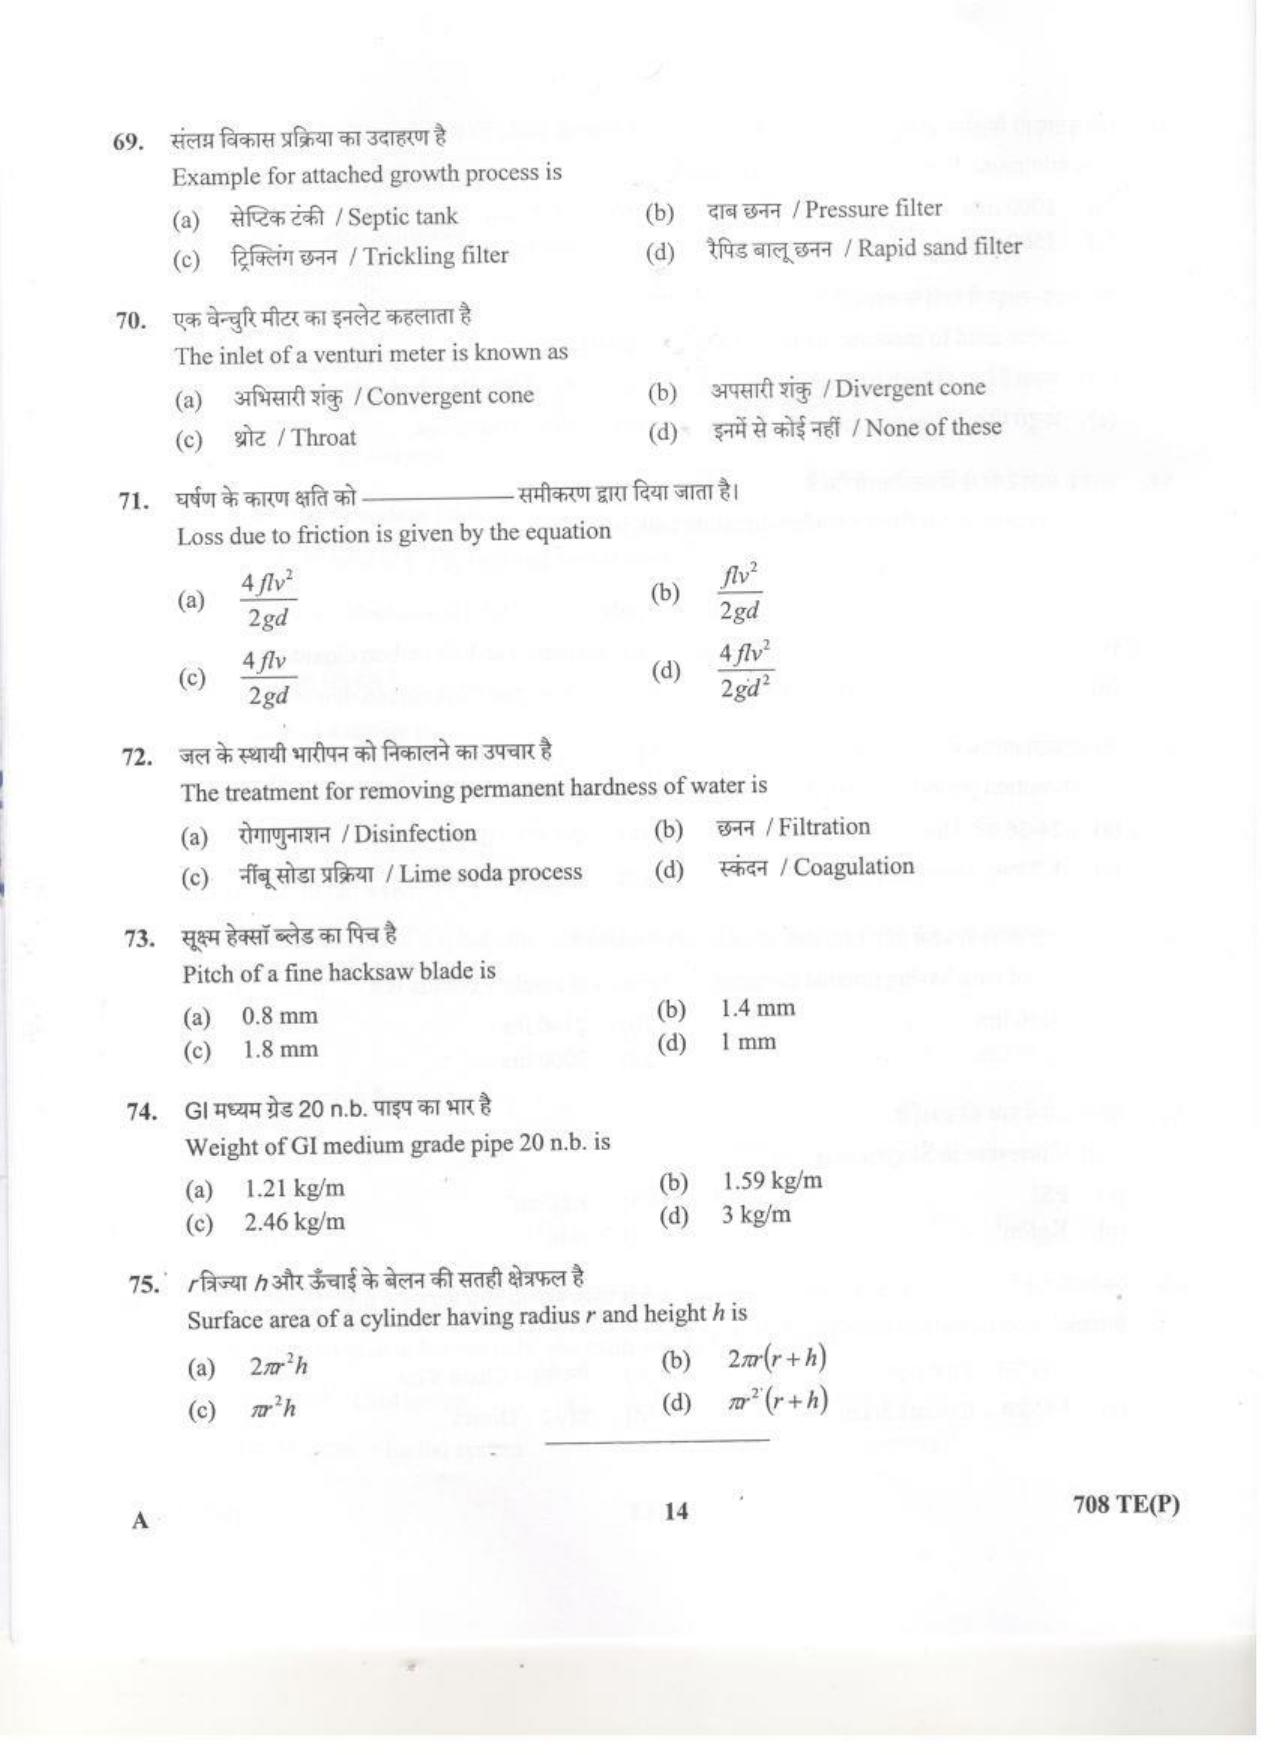 LPSC Technician ‘B’ (Plumber) 2020 Question Paper - Page 13